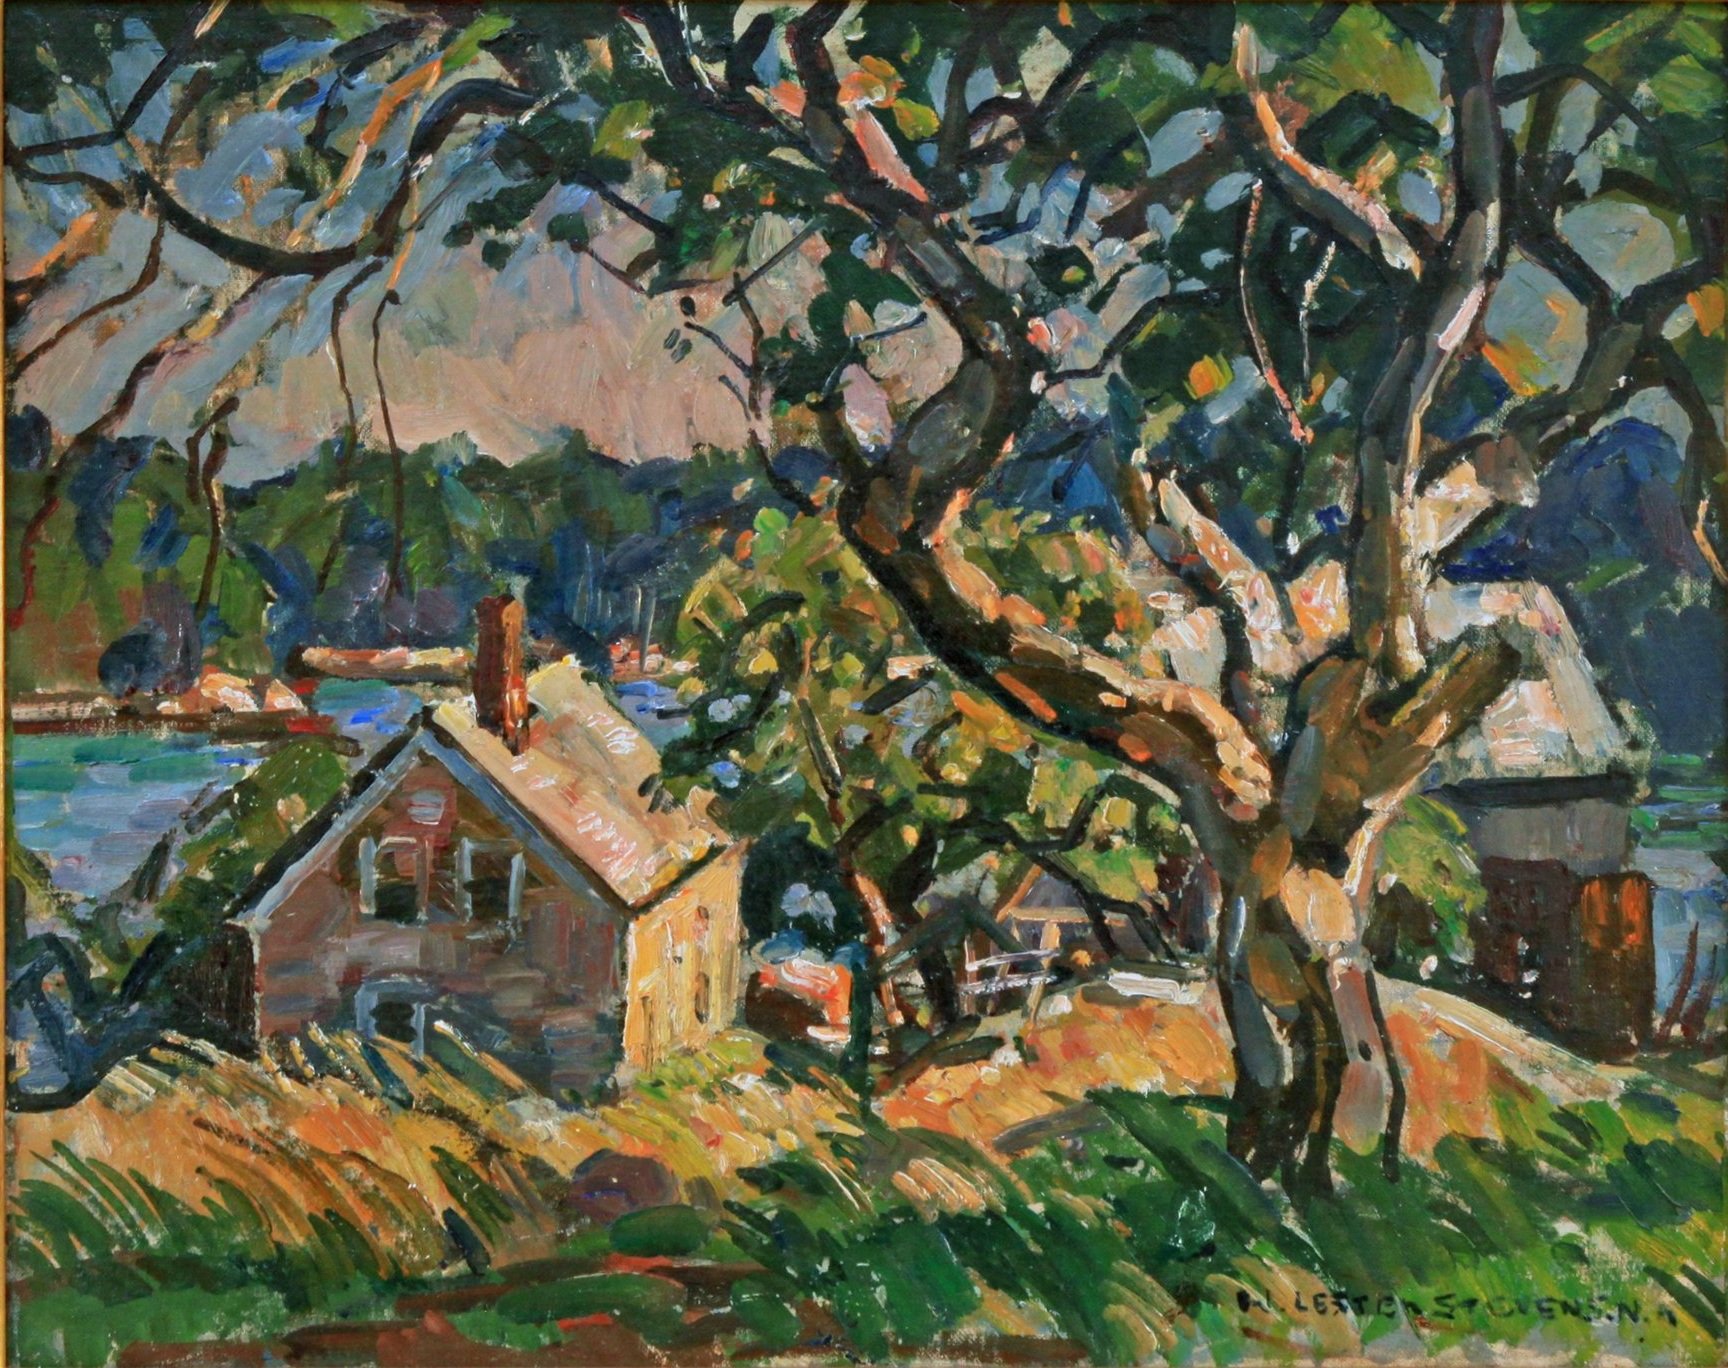  Feature Consignment:  Lot 131 -  W. Lester Stevens (1888-1969)   Vinalhaven, Maine  oil on canvas board, 16 x 20 in. 